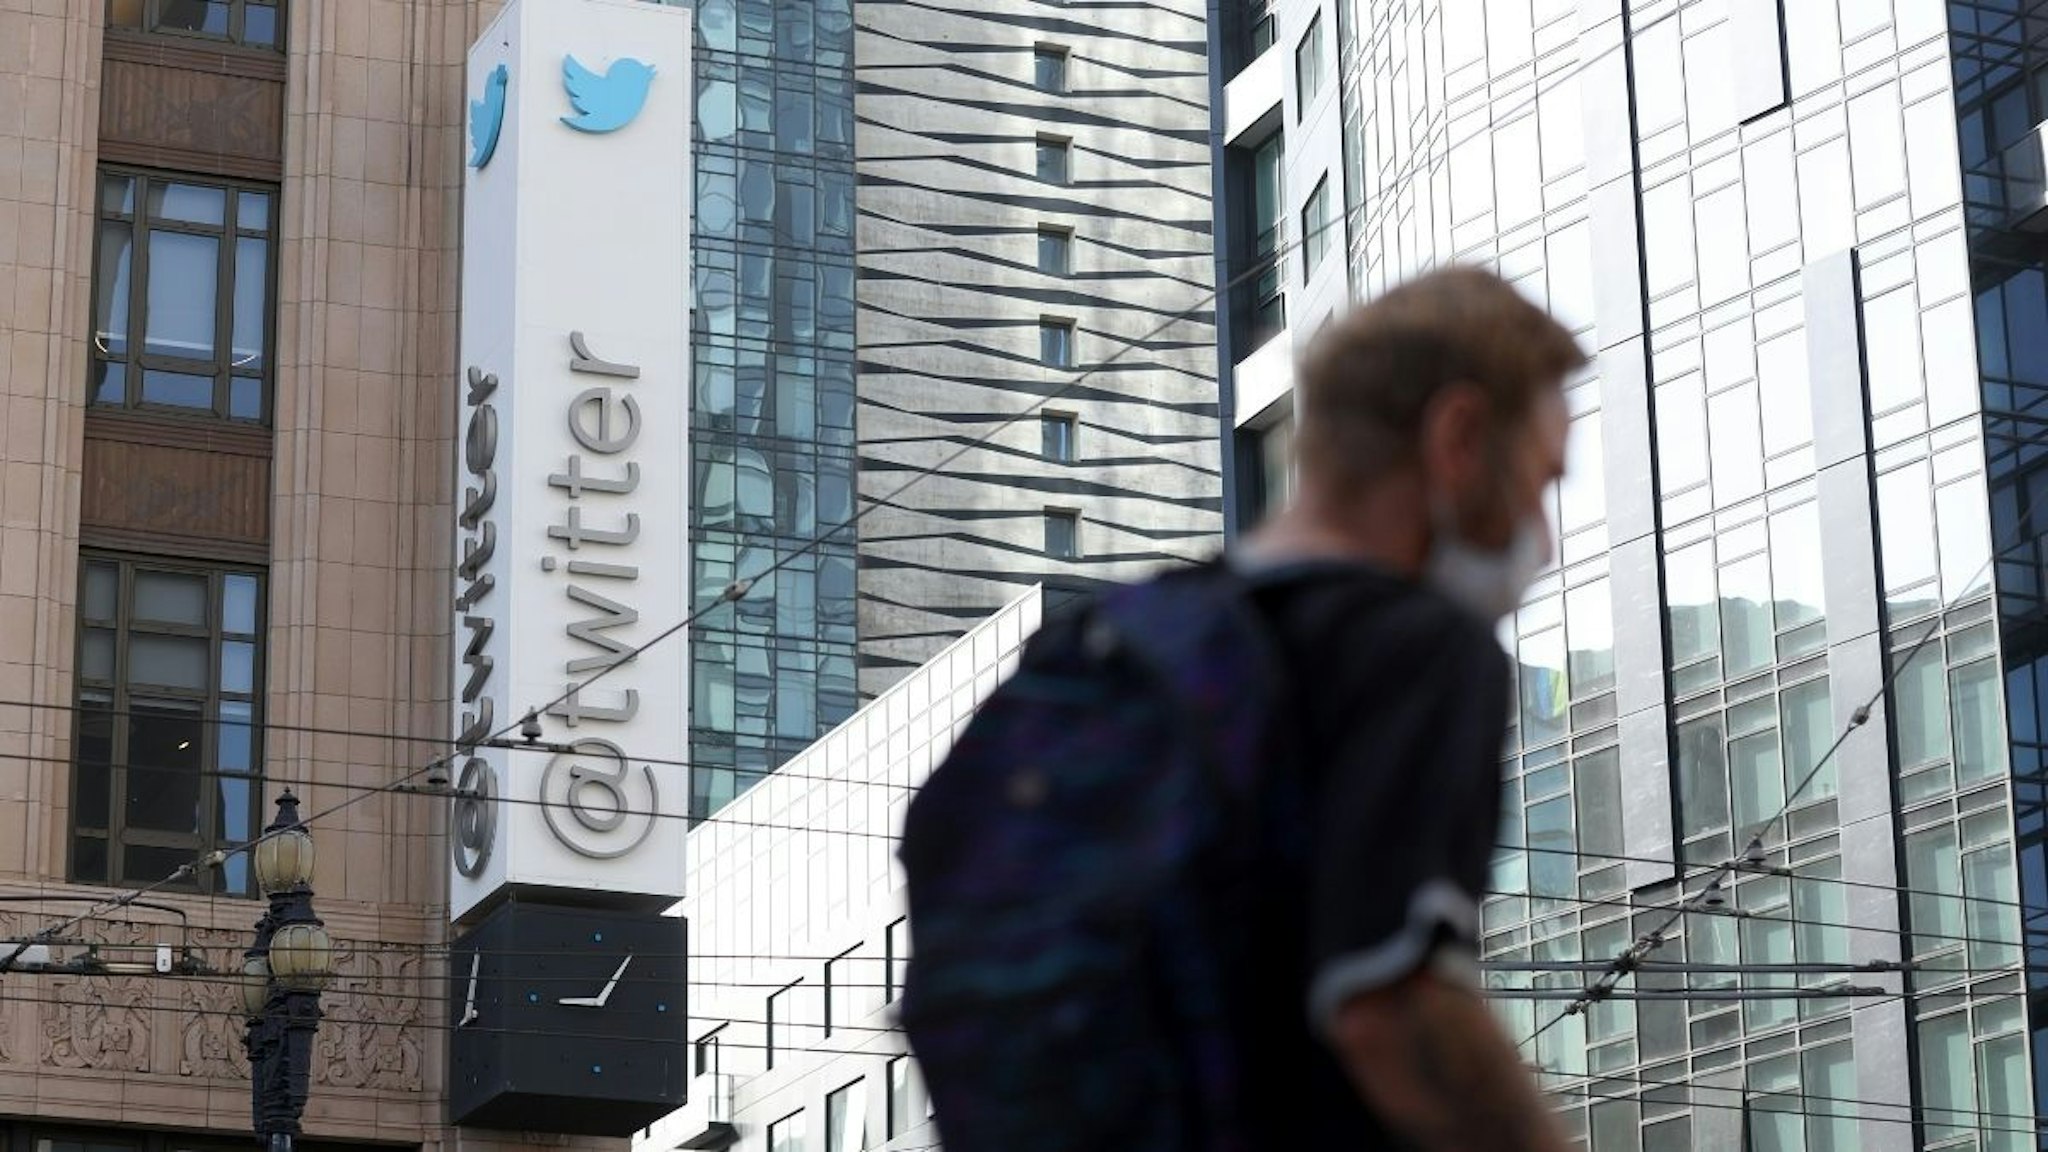 A sign is posted on the exterior of Twitter headquarters on April 27, 2022 in San Francisco, California. Billionaire Elon Musk, CEO of Tesla and Space X, reached an agreement to purchase social media platform Twitter for $44 billion.